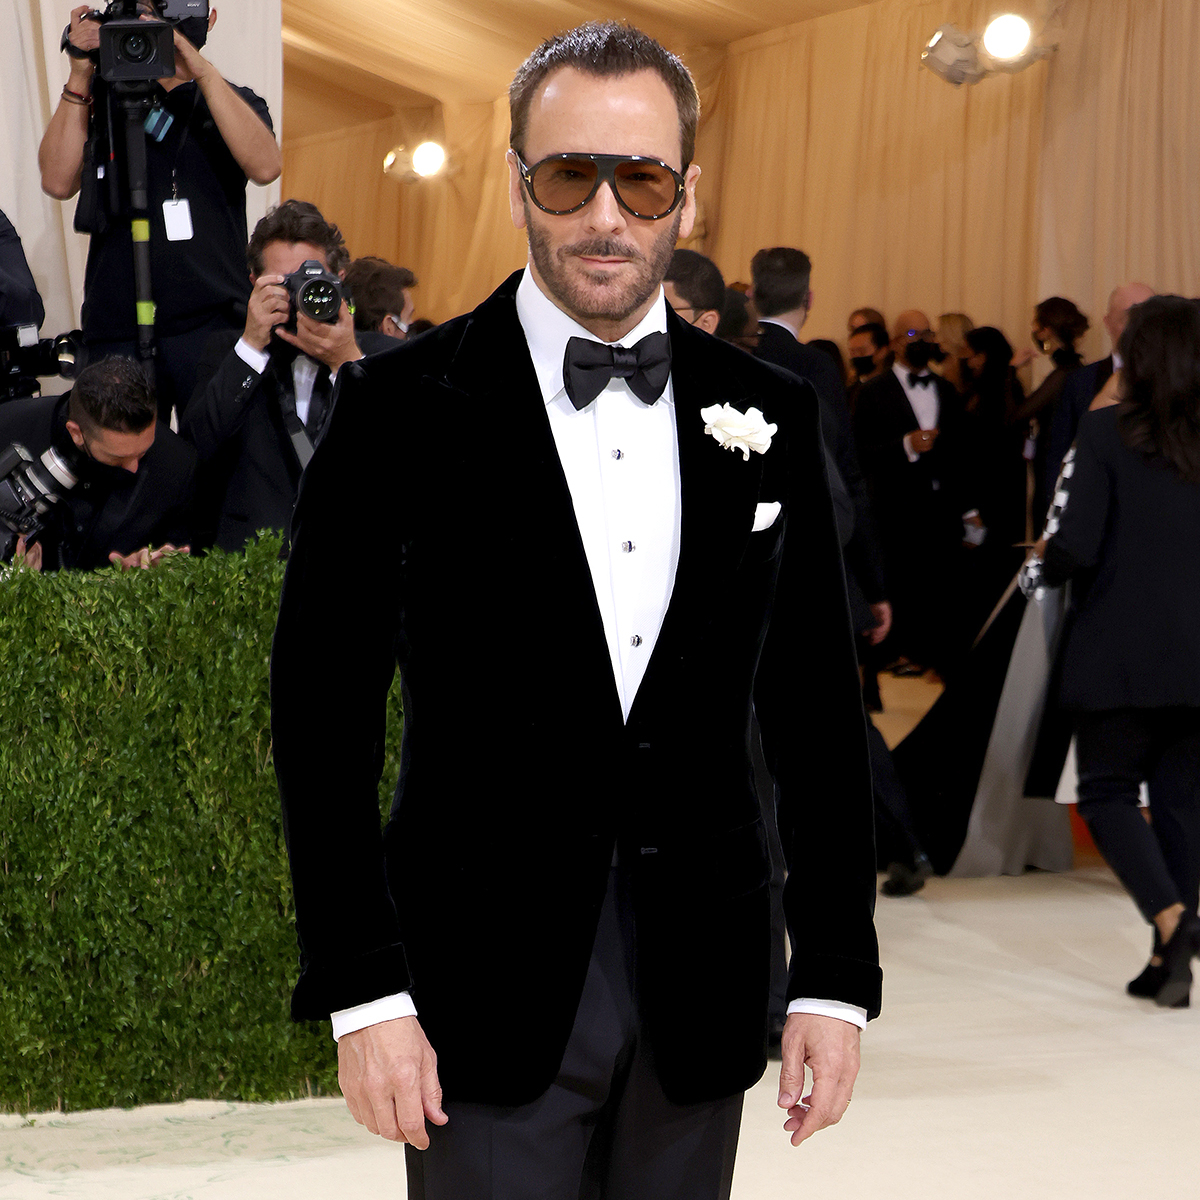 Tom Ford's husband and partner of 35 years Richard Buckley dies